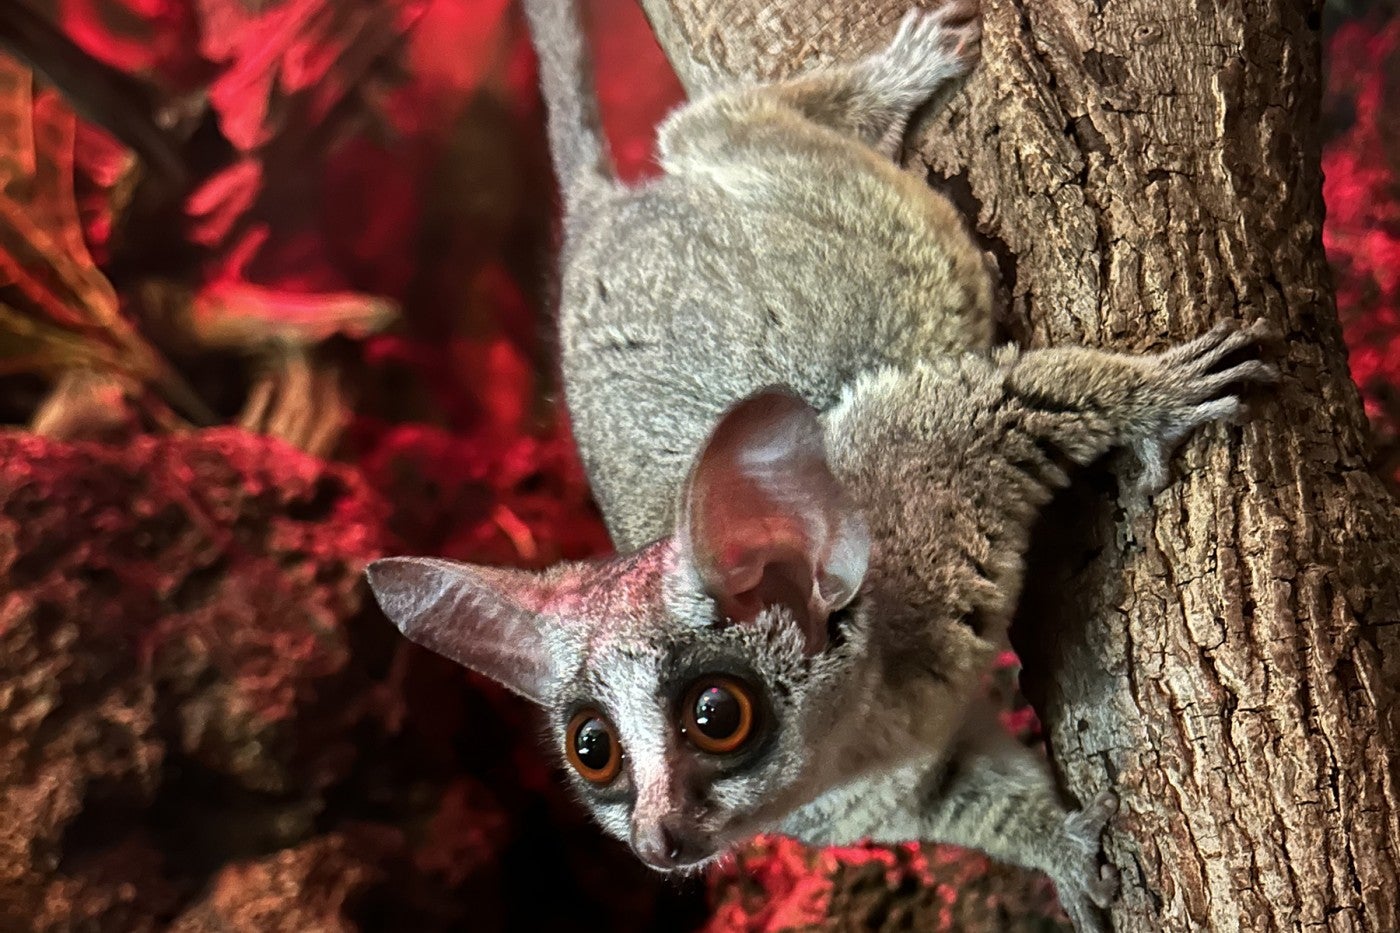 A southern lesser galago clings to the trunk of a tree. Its head is toward the bottom of the tree, and it is holding its head up and looking out to the viewer's left.